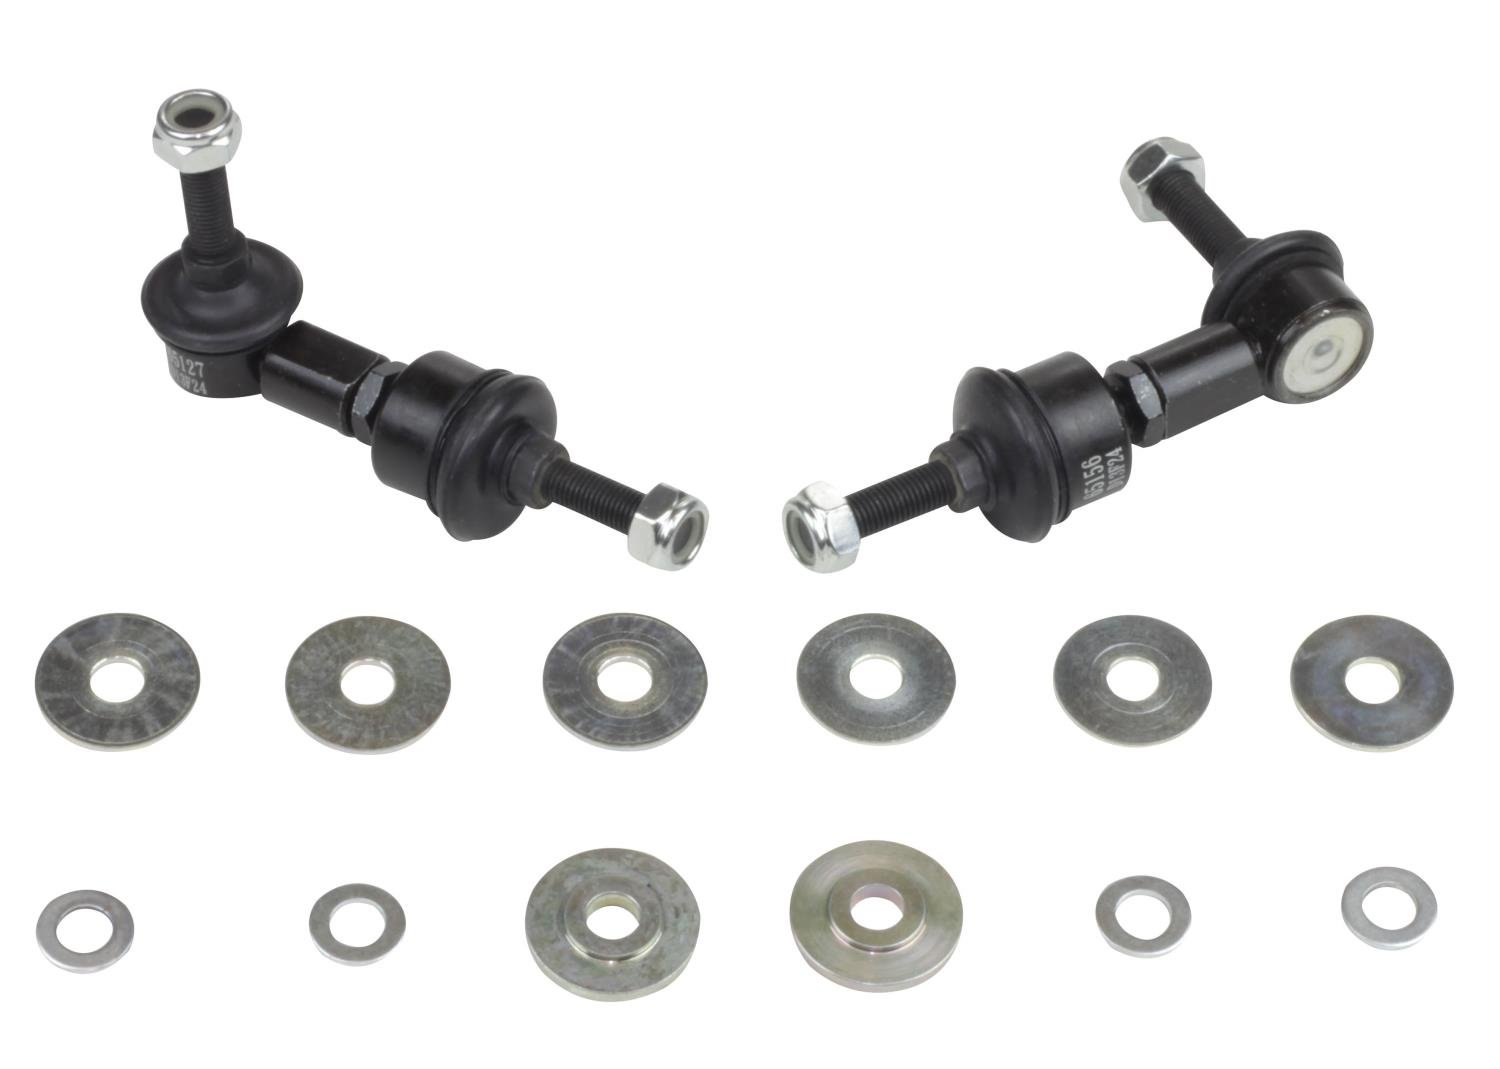 KLC107 Front Sway Bar Link Kit -Adjustable ball end links for 1989-1998 Nissan 240SX S13 and S14